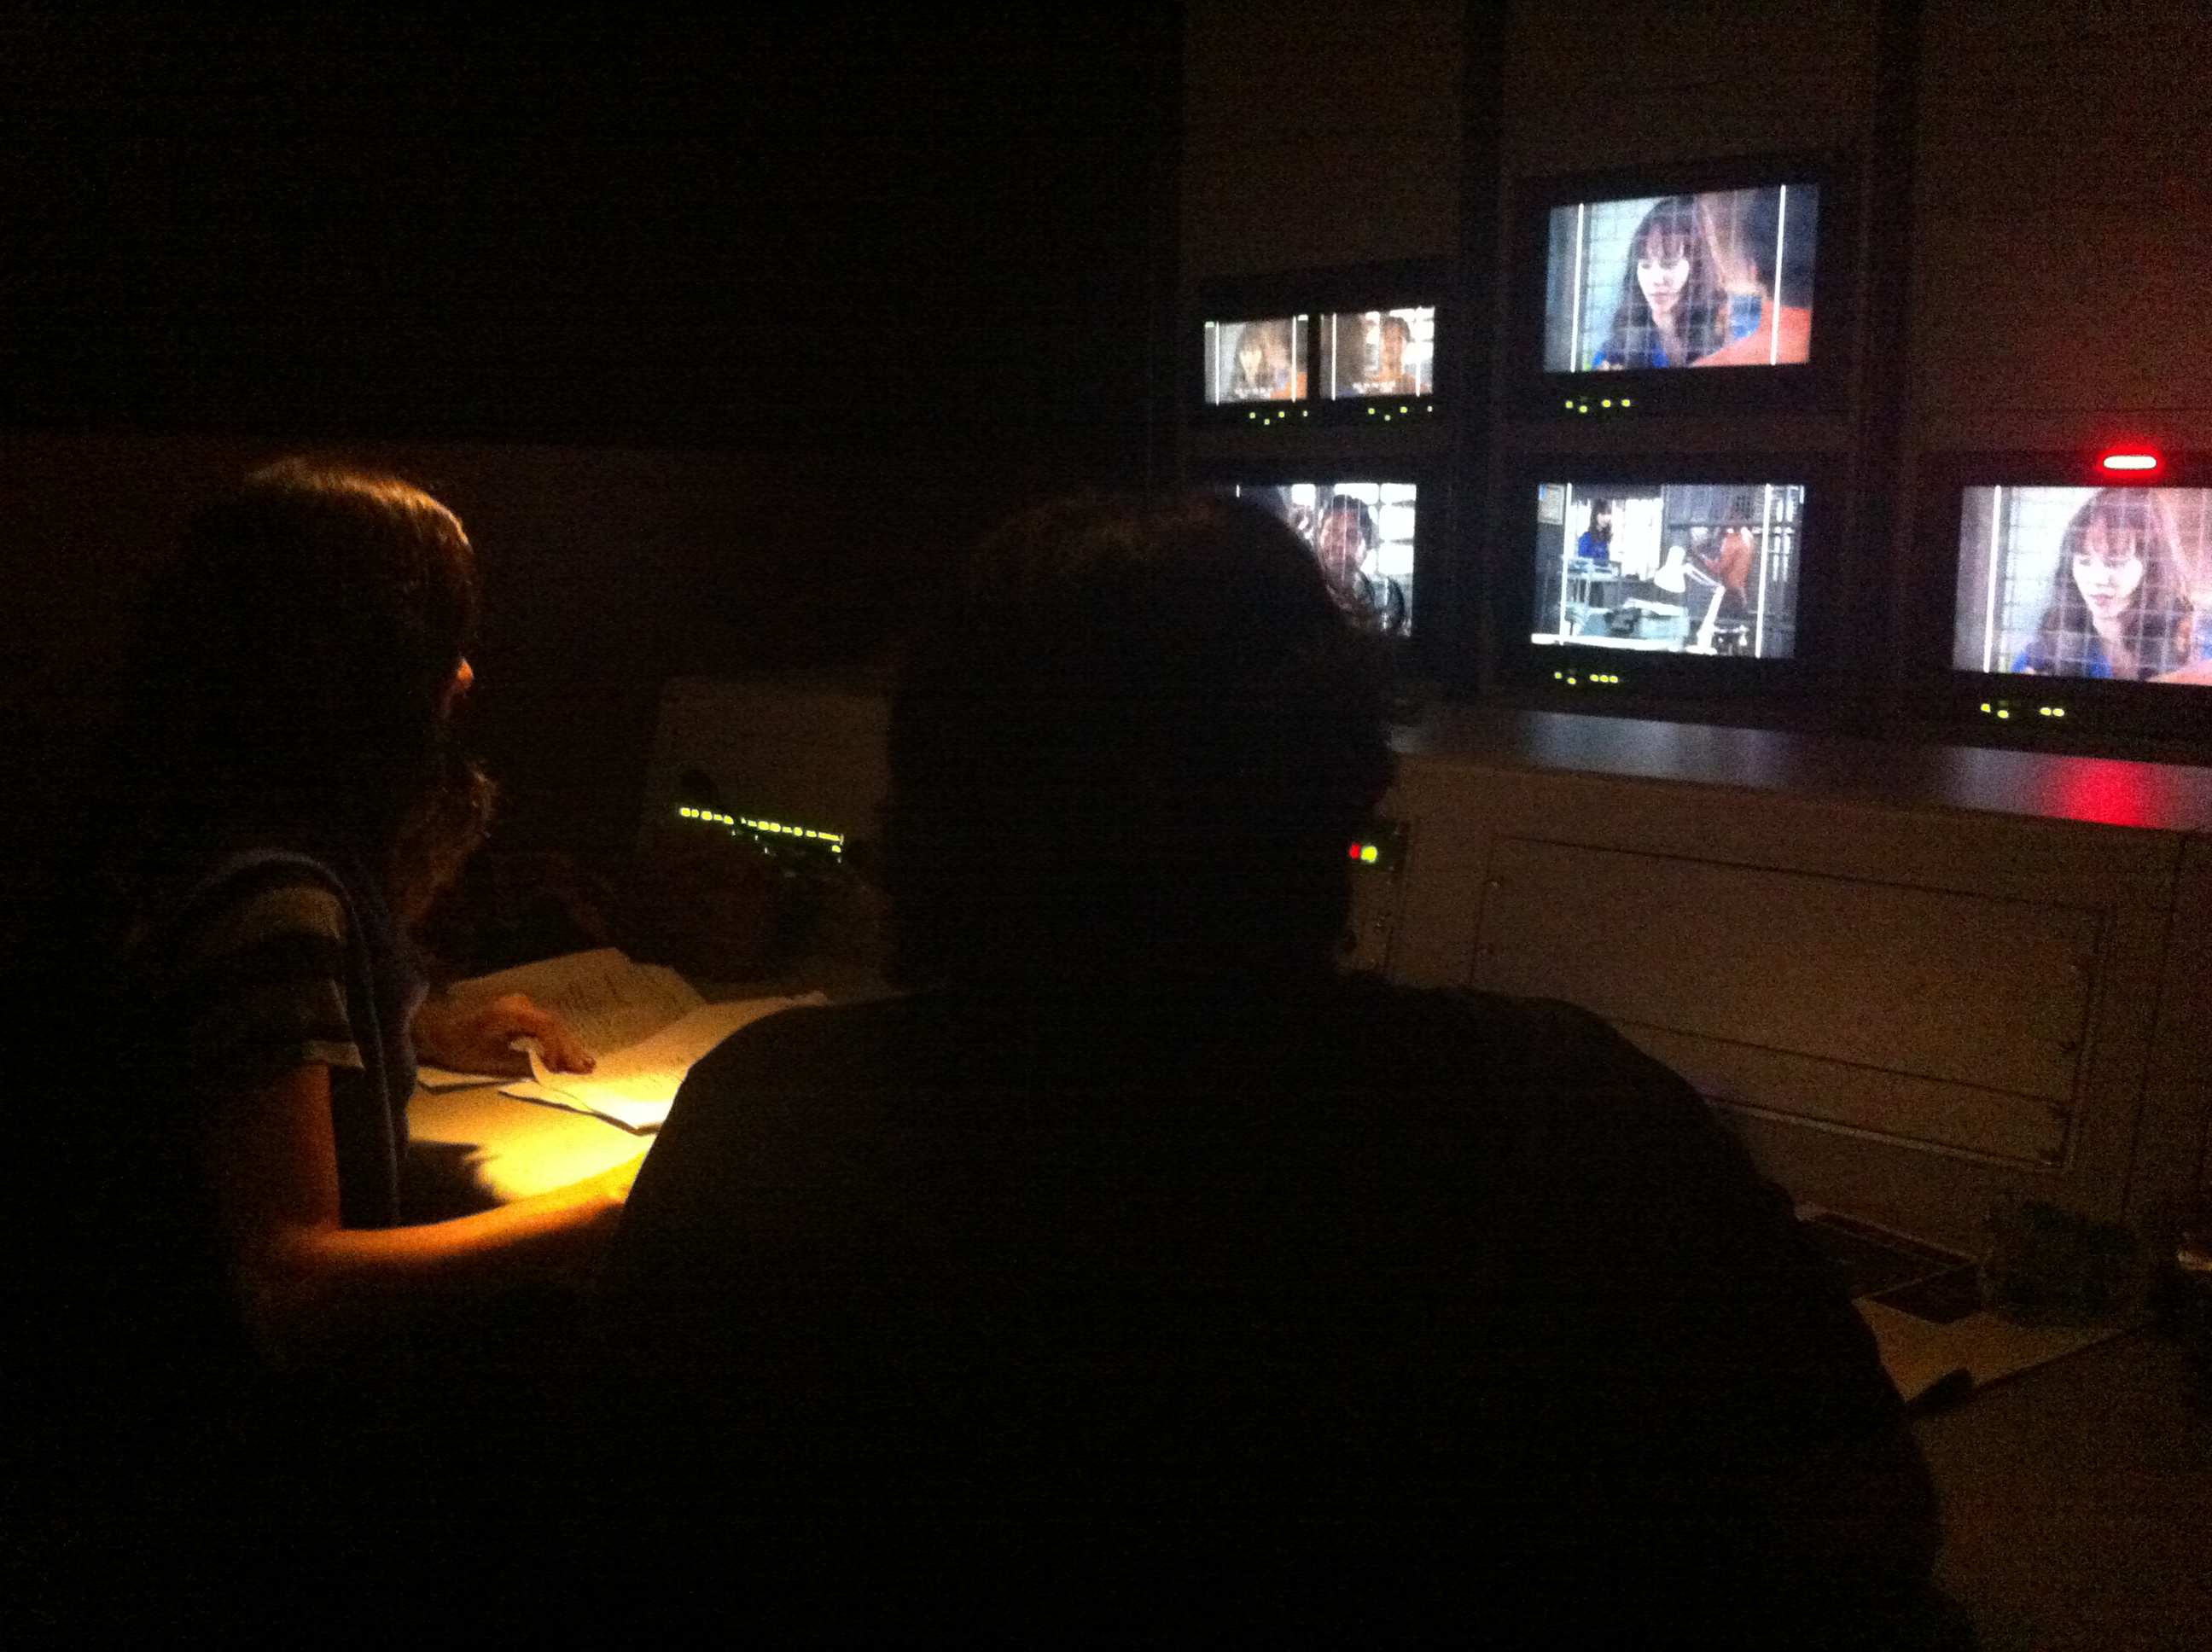 Directing from the switcher, 2013